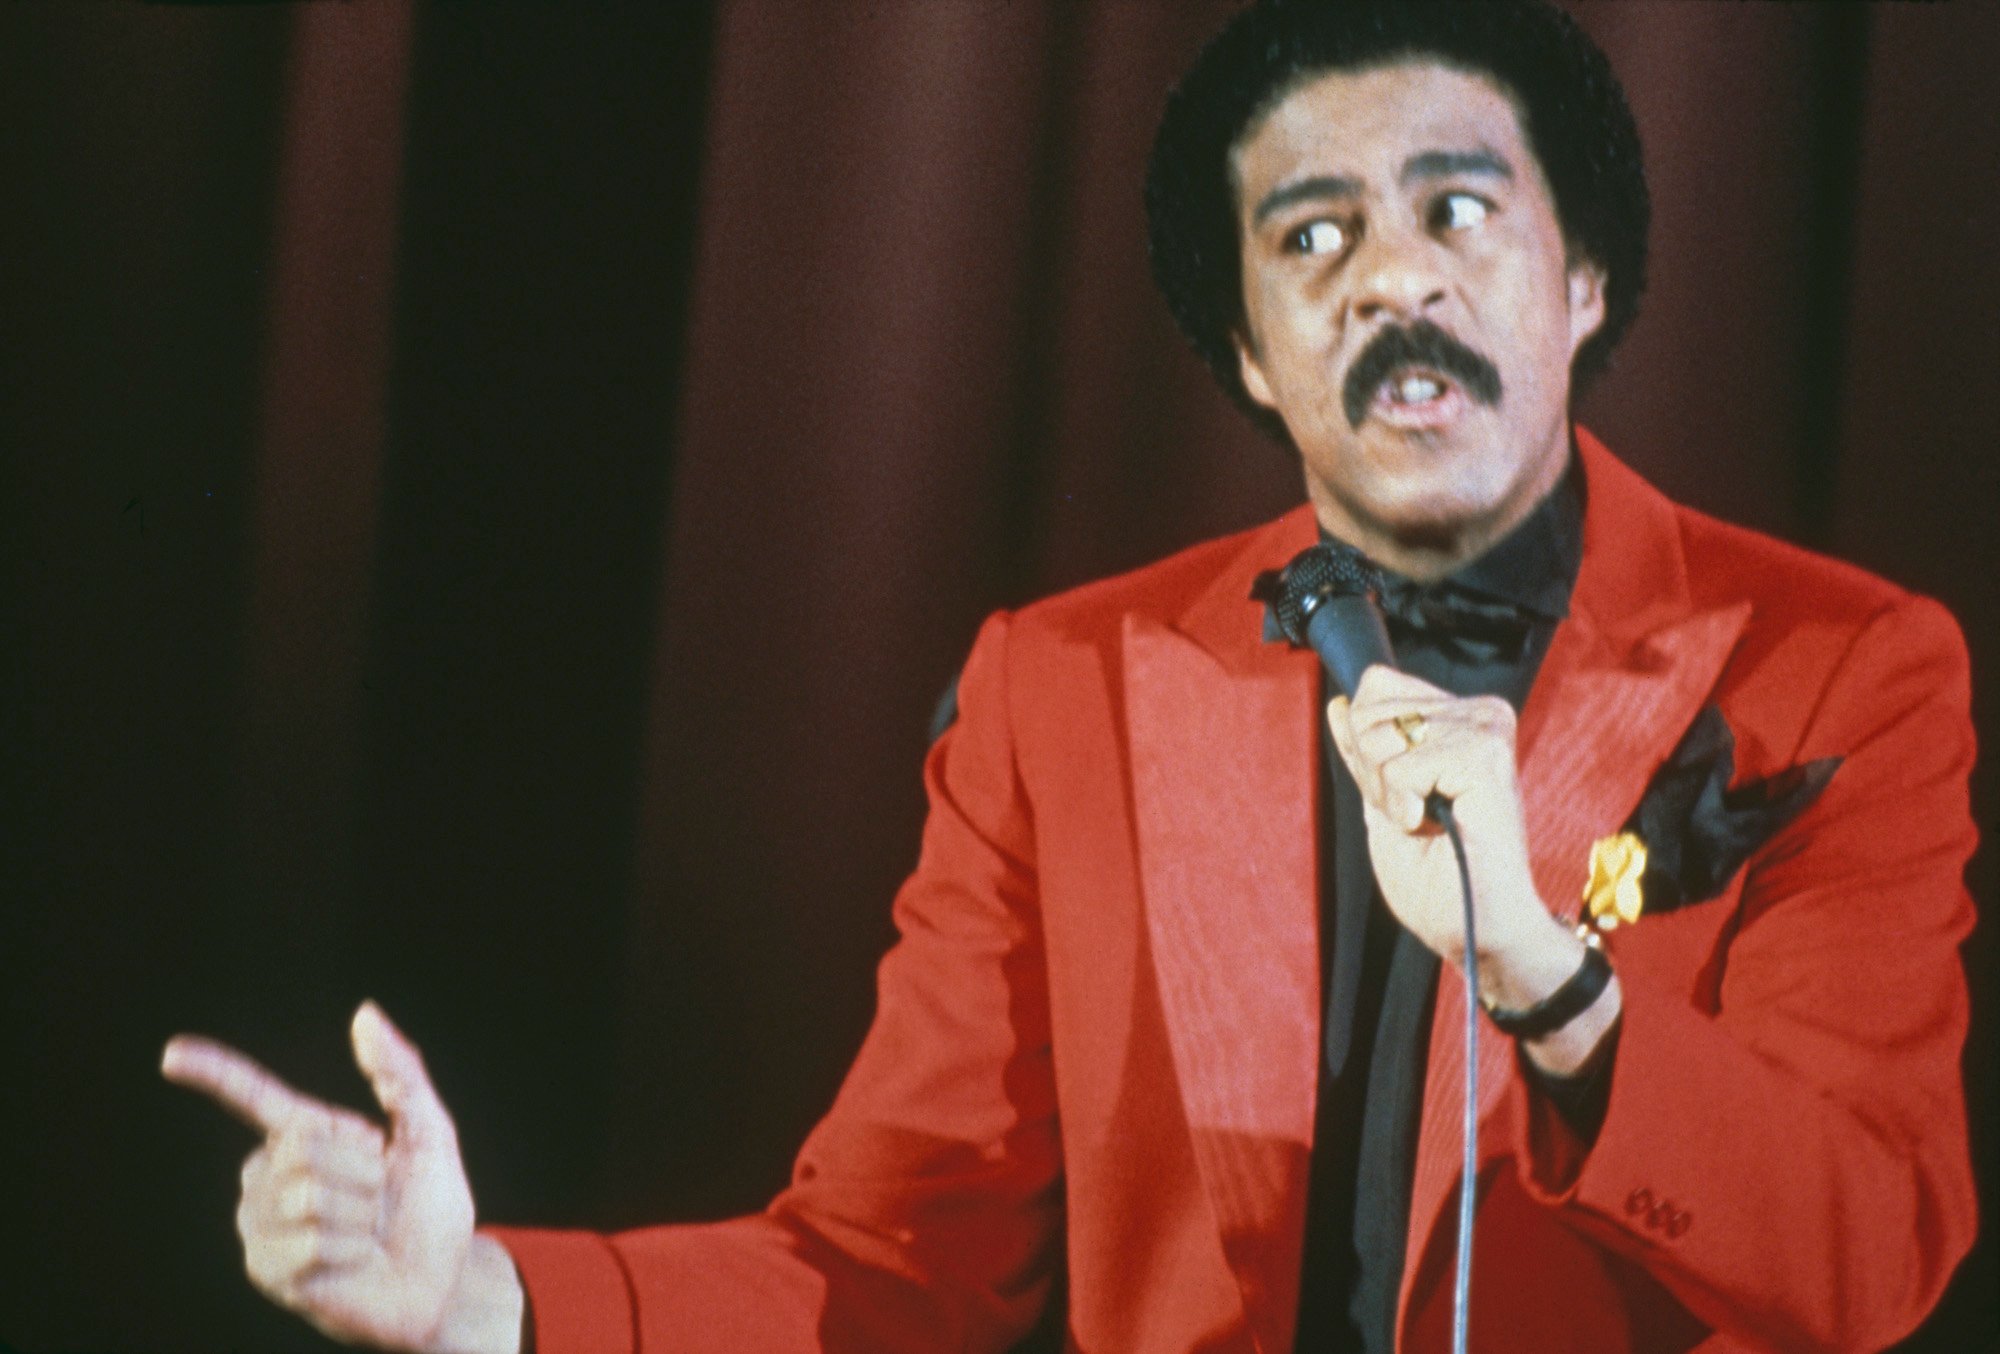 Richard Pryor does standup in a red suit